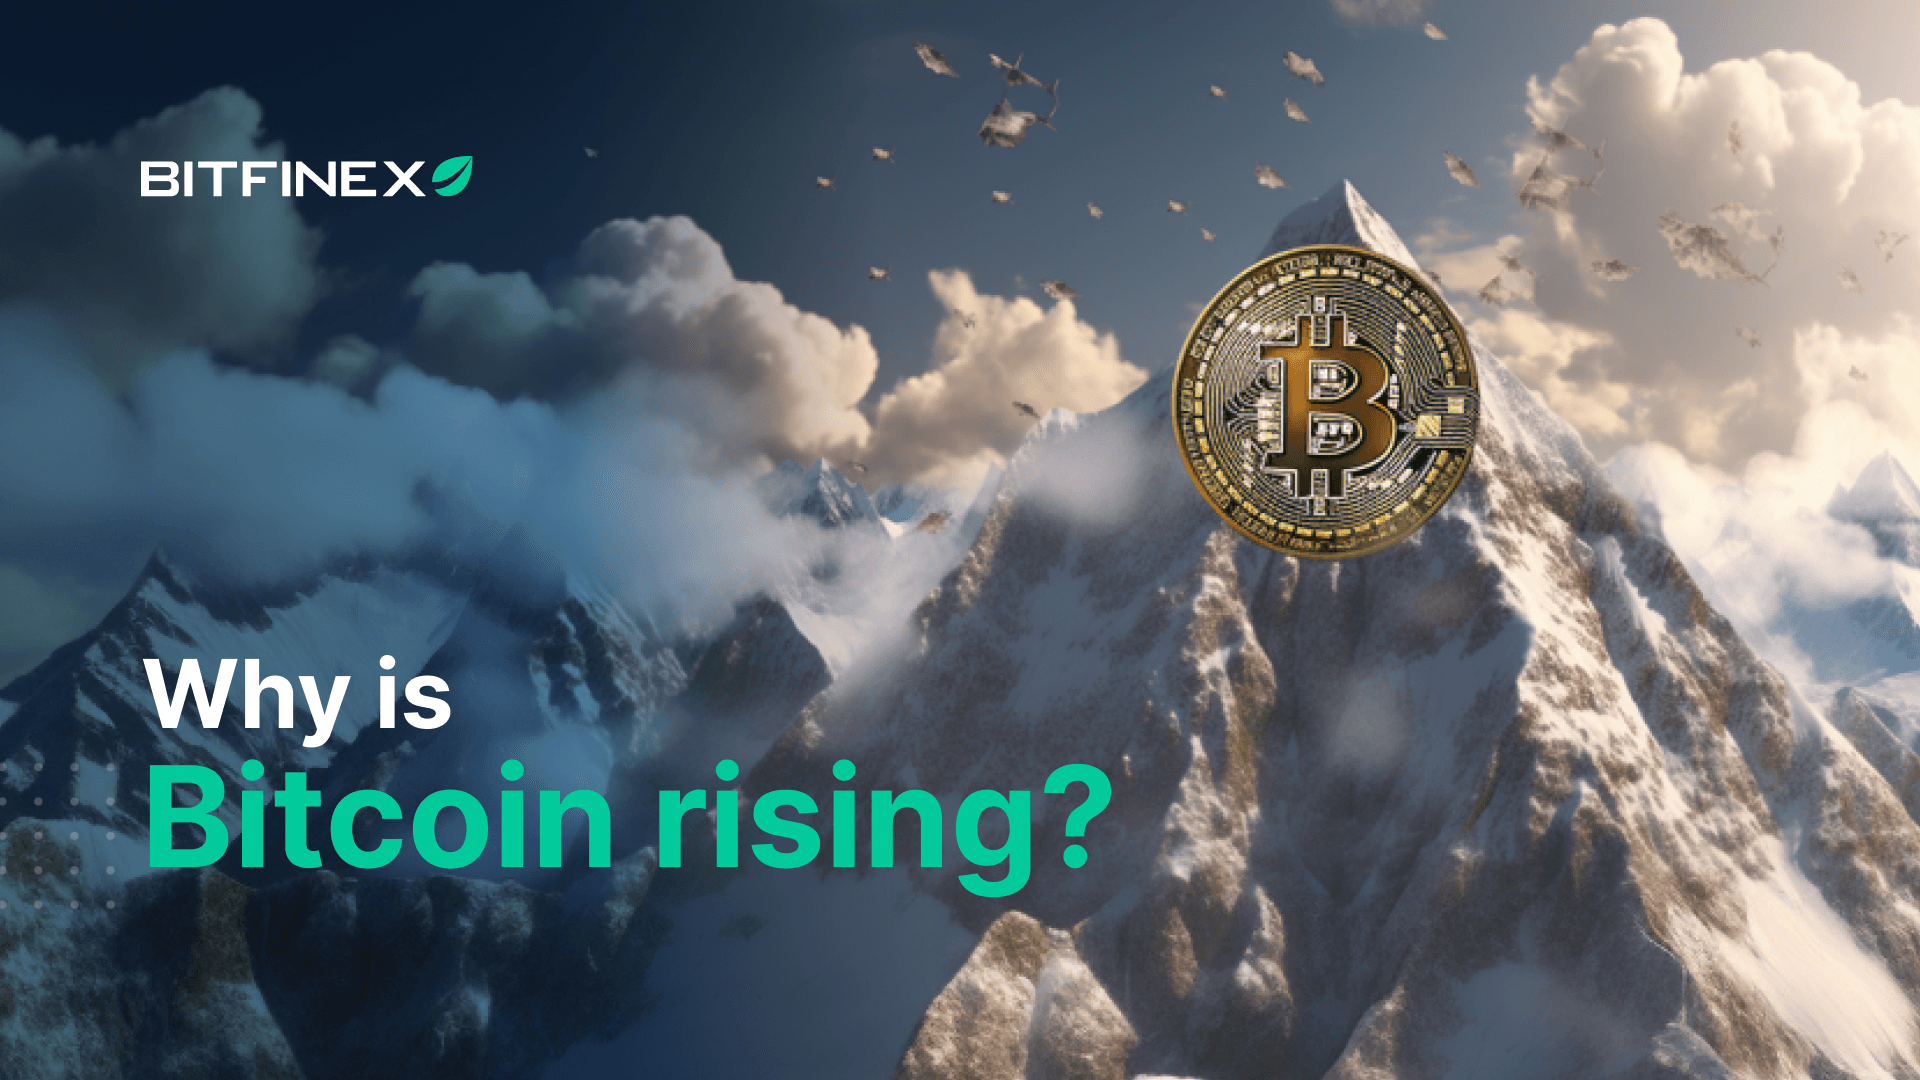 Why is Bitcoin rising?